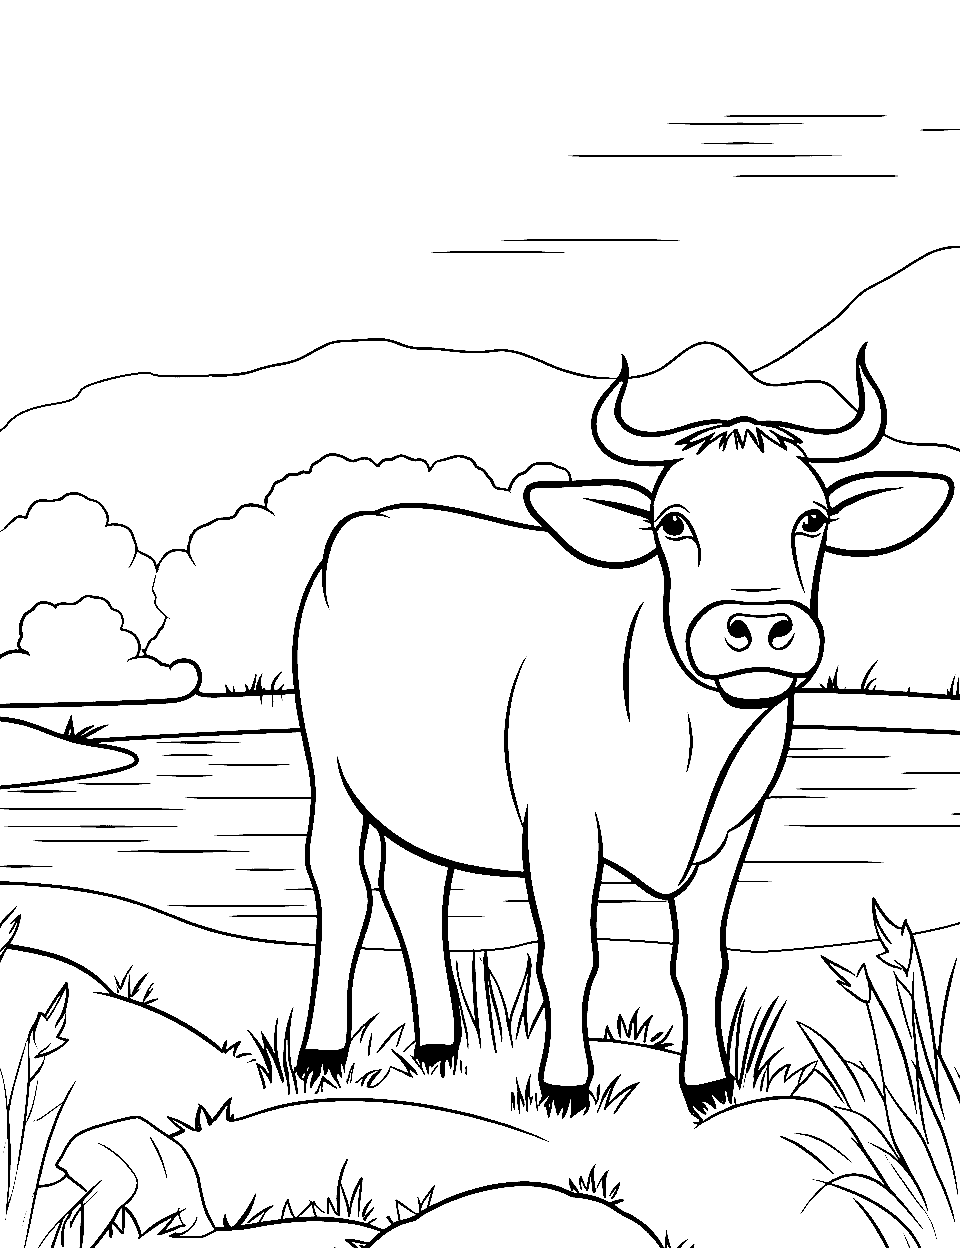 Bovine at the Pond Coloring Page - A cow, quietly standing beside a simplistic, serene pond.